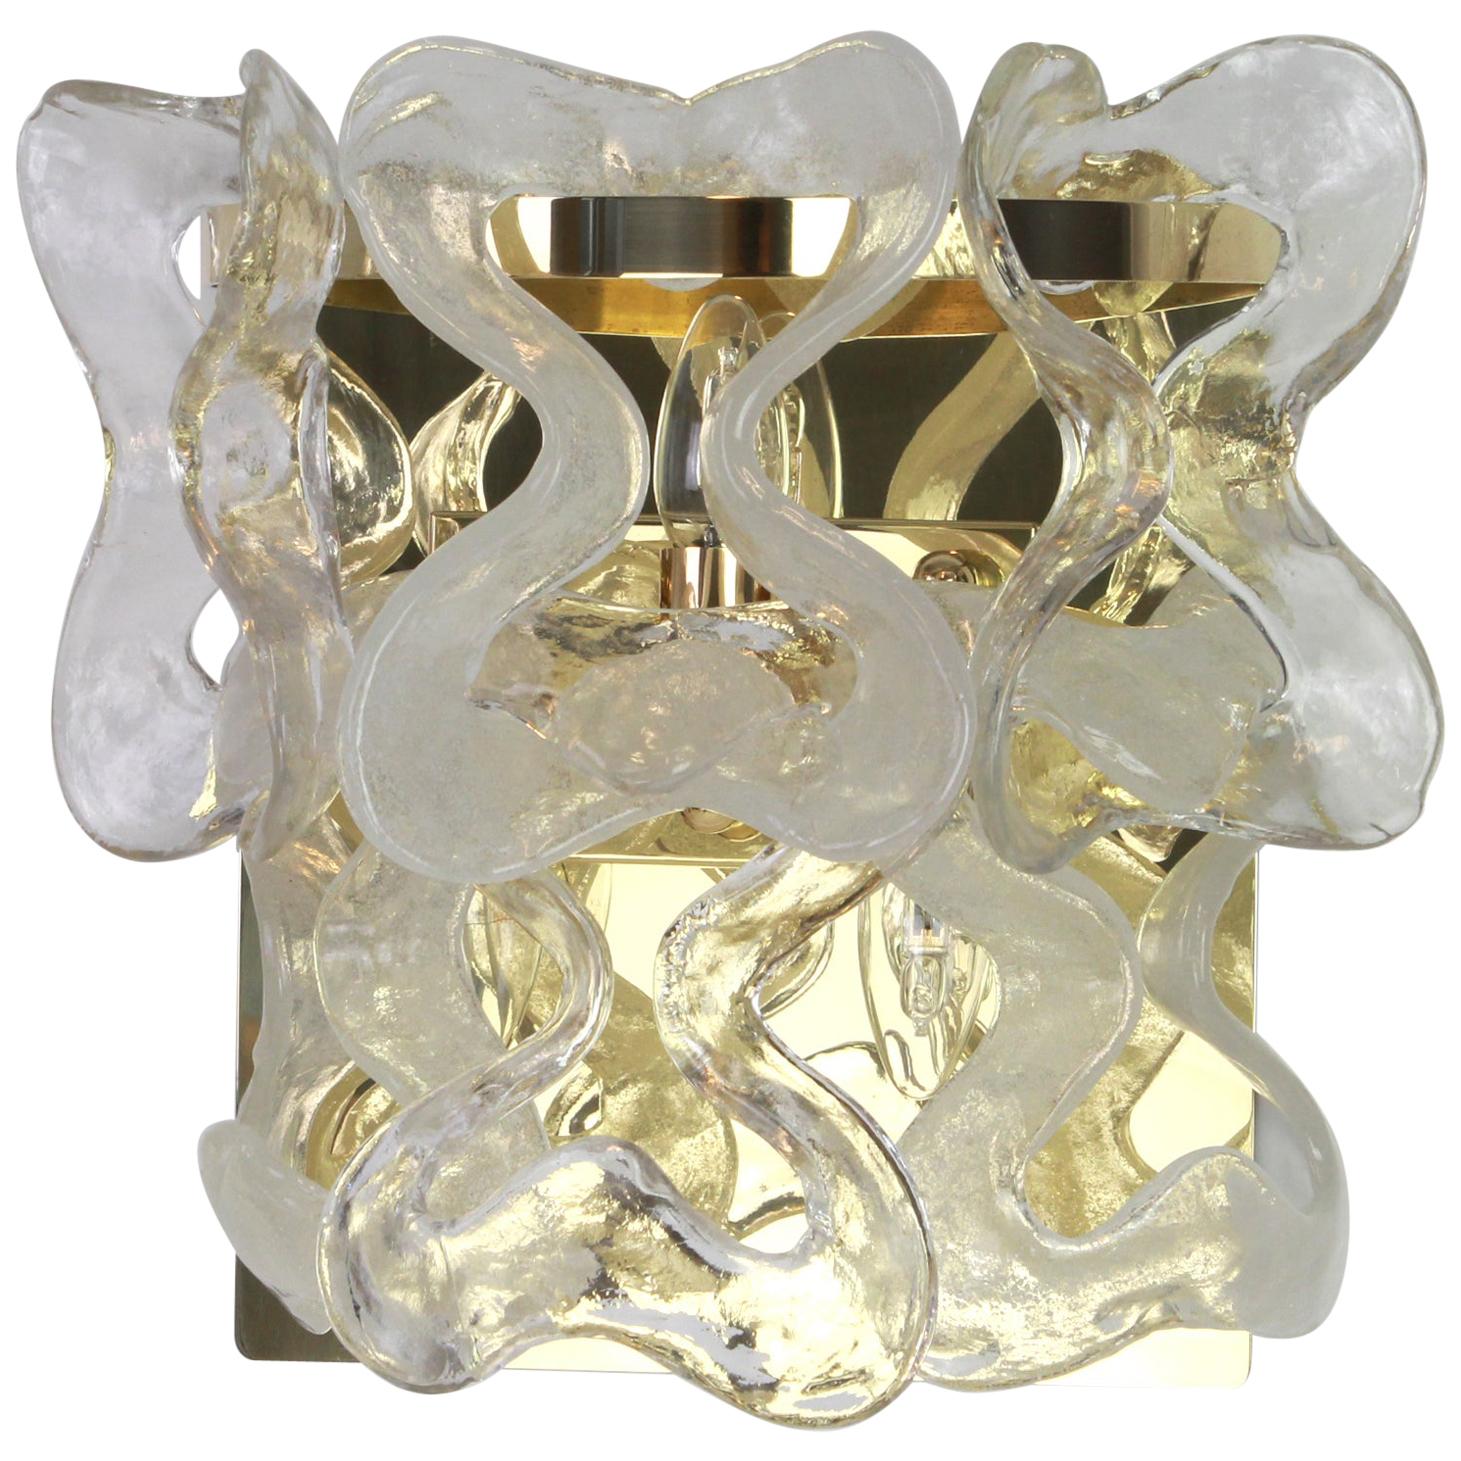 1 of 2 Large Murano Glass Wall Sconce by Kalmar Mod. Catena, Austria, 1960s For Sale